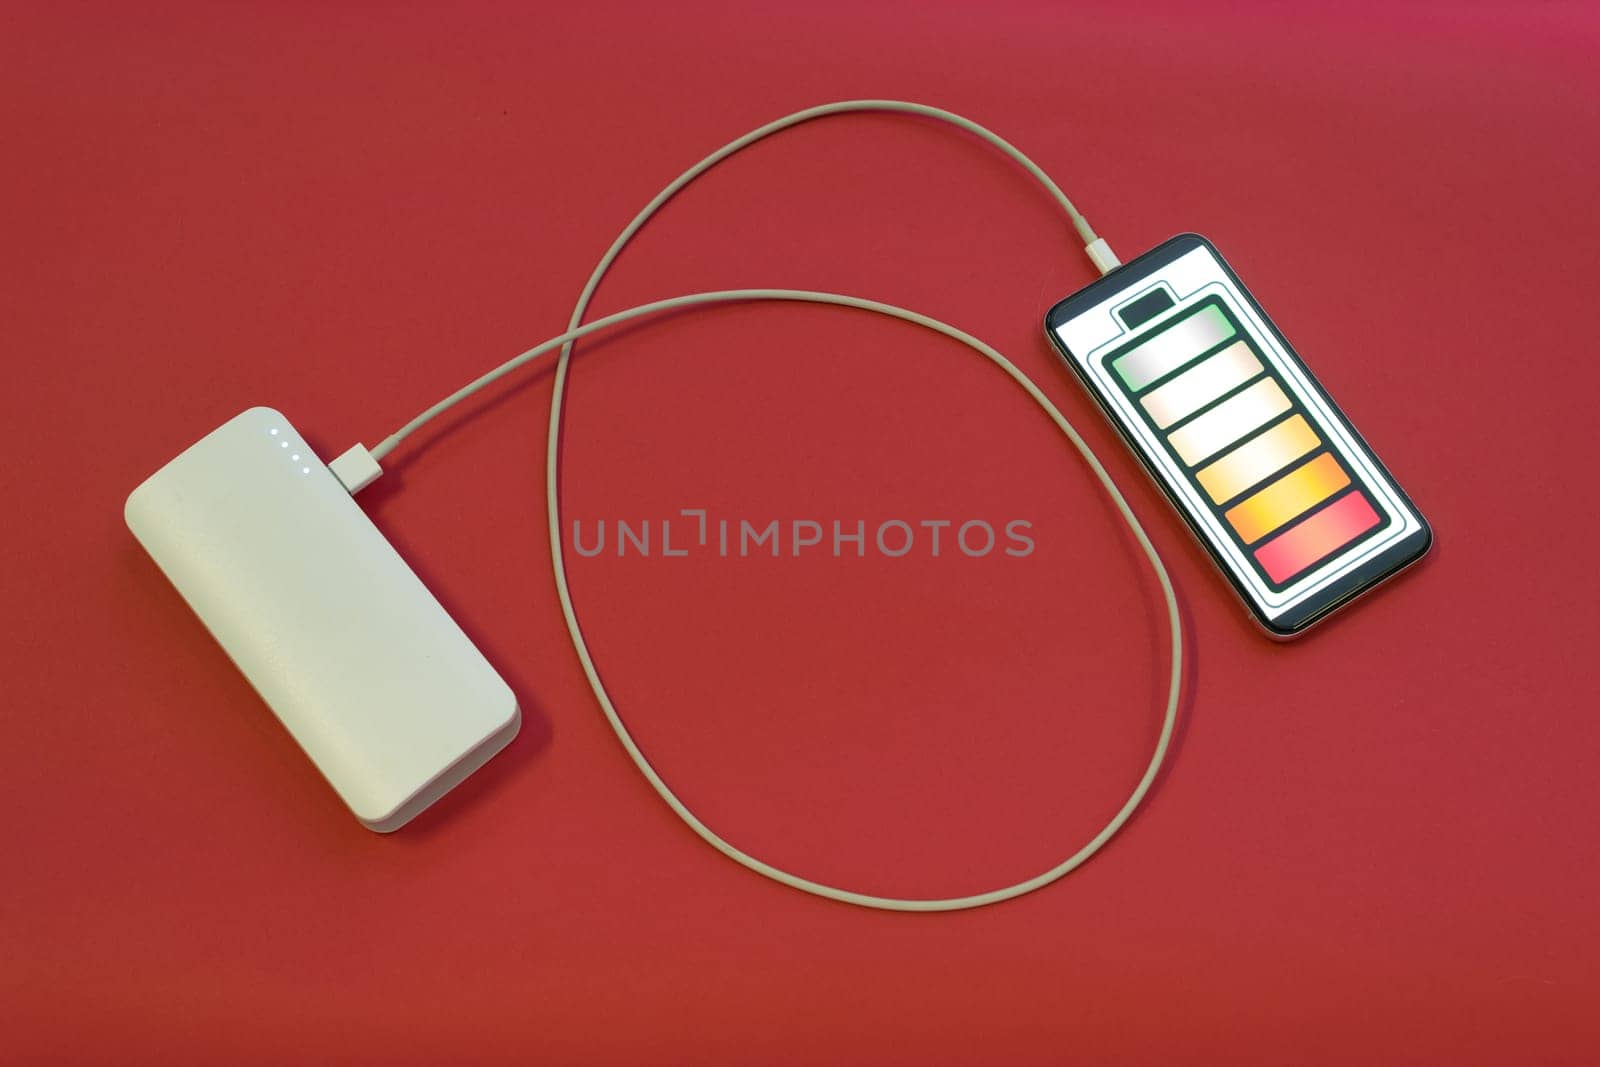 Smartphone is charging with power bank on red background by zartarn